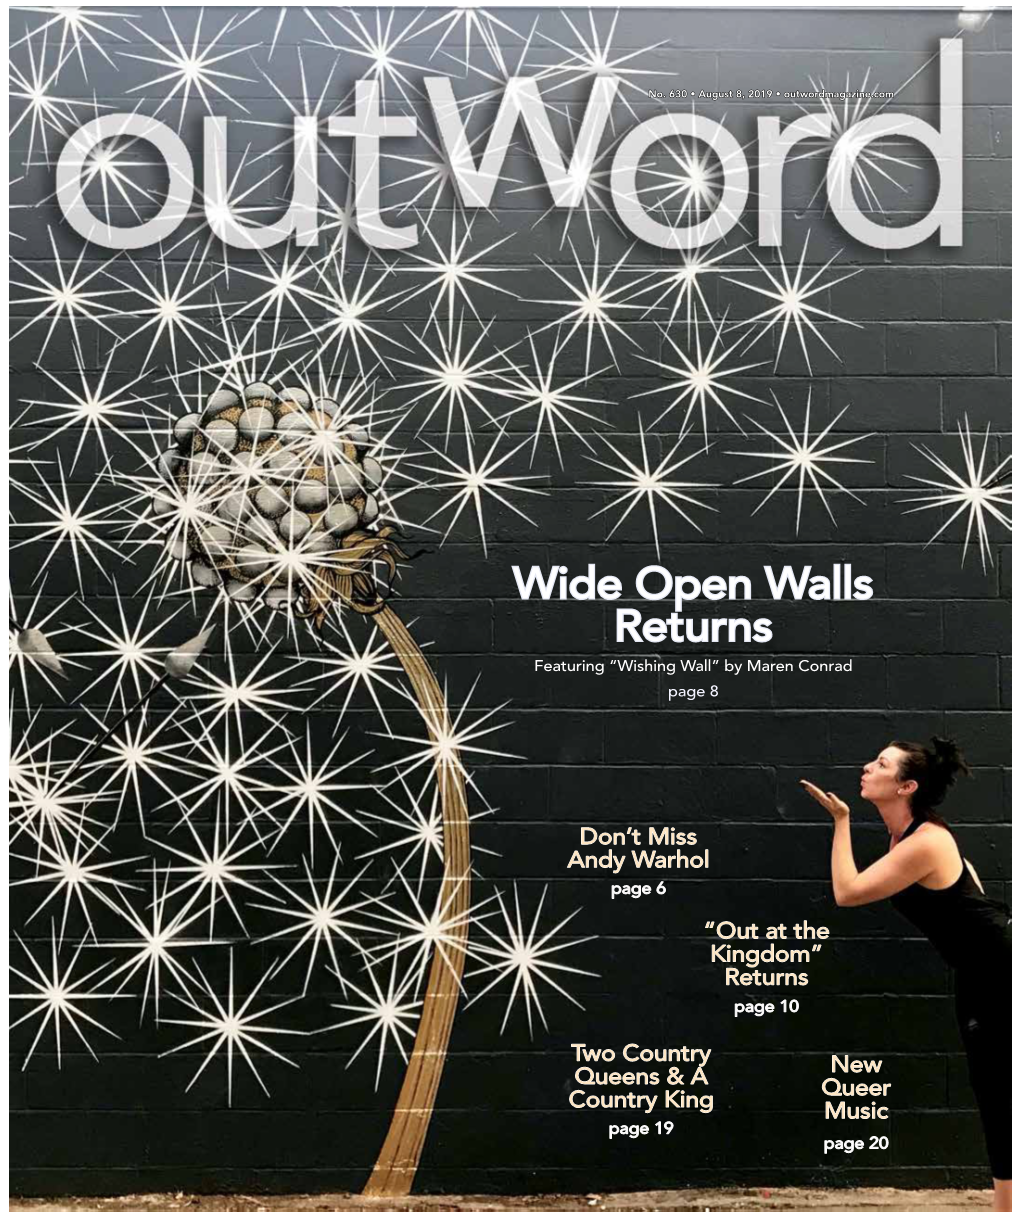 Wide Open Walls Returns Featuring “Wishing Wall” by Maren Conrad Page 8